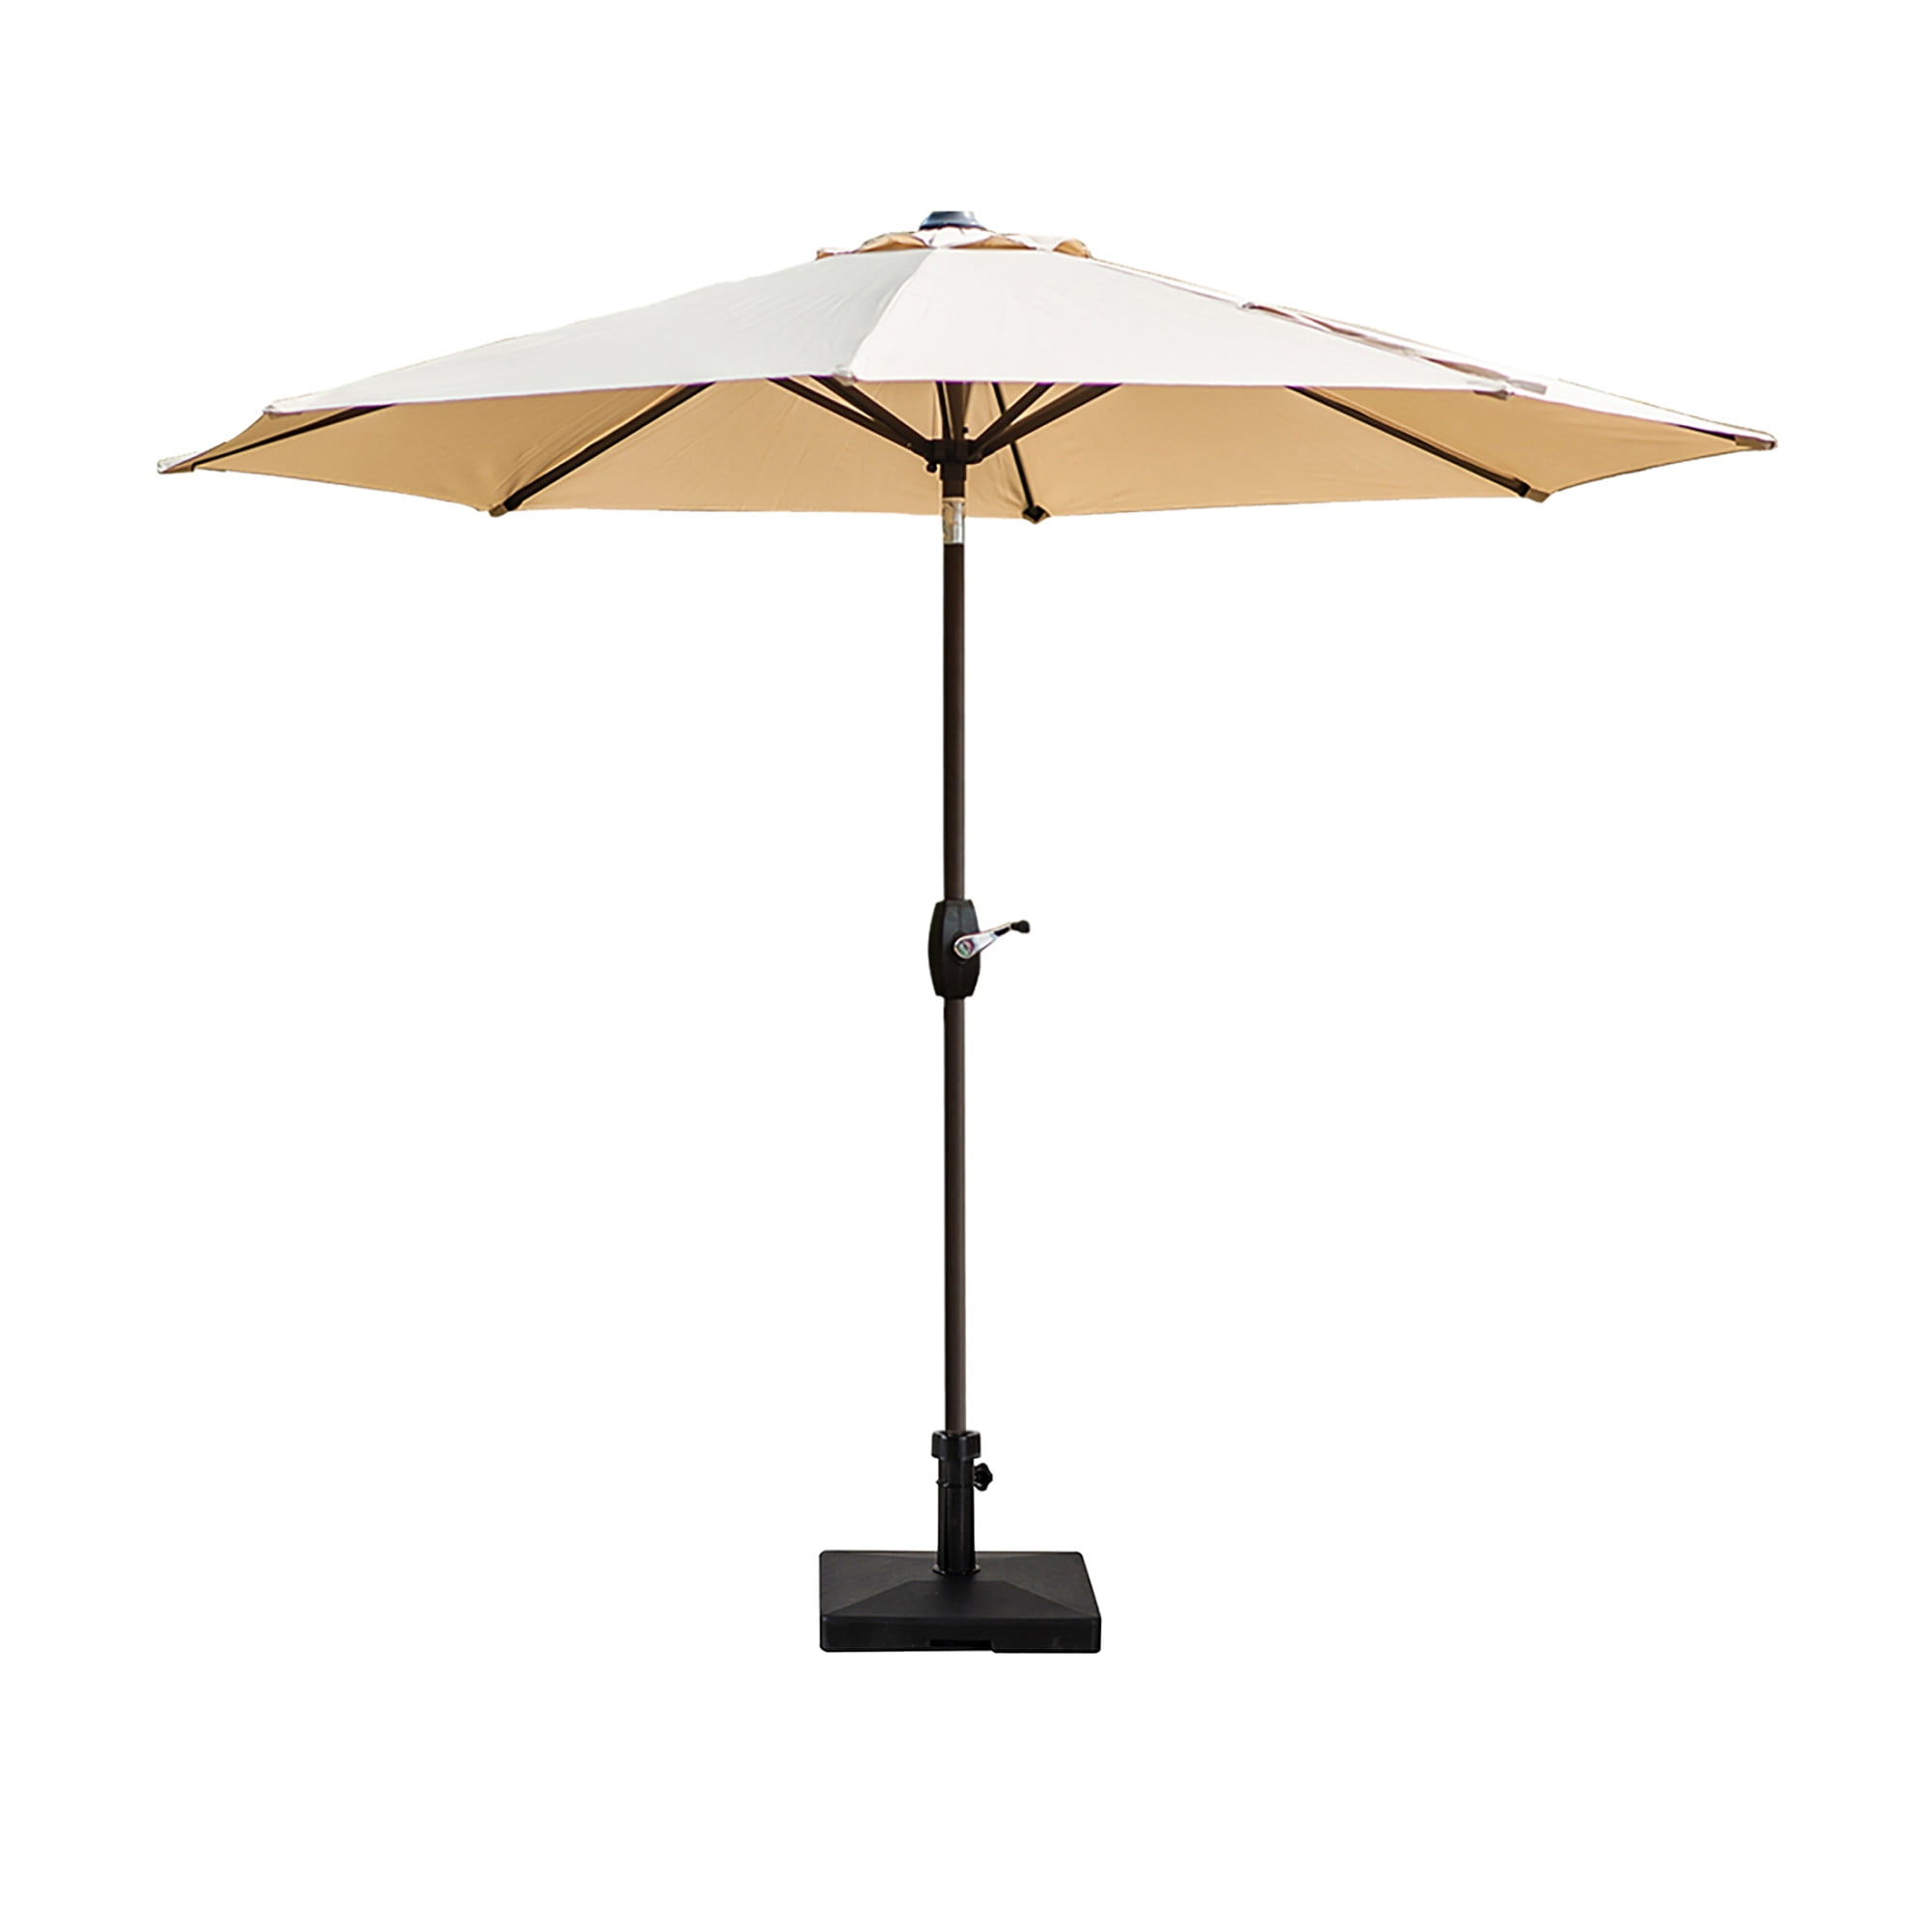 EVERY DAY 9FT OUTDOOR WATER/ UV RESISTANT MARKET PATIO UMBRELLA W/ CRA 50035 BE 